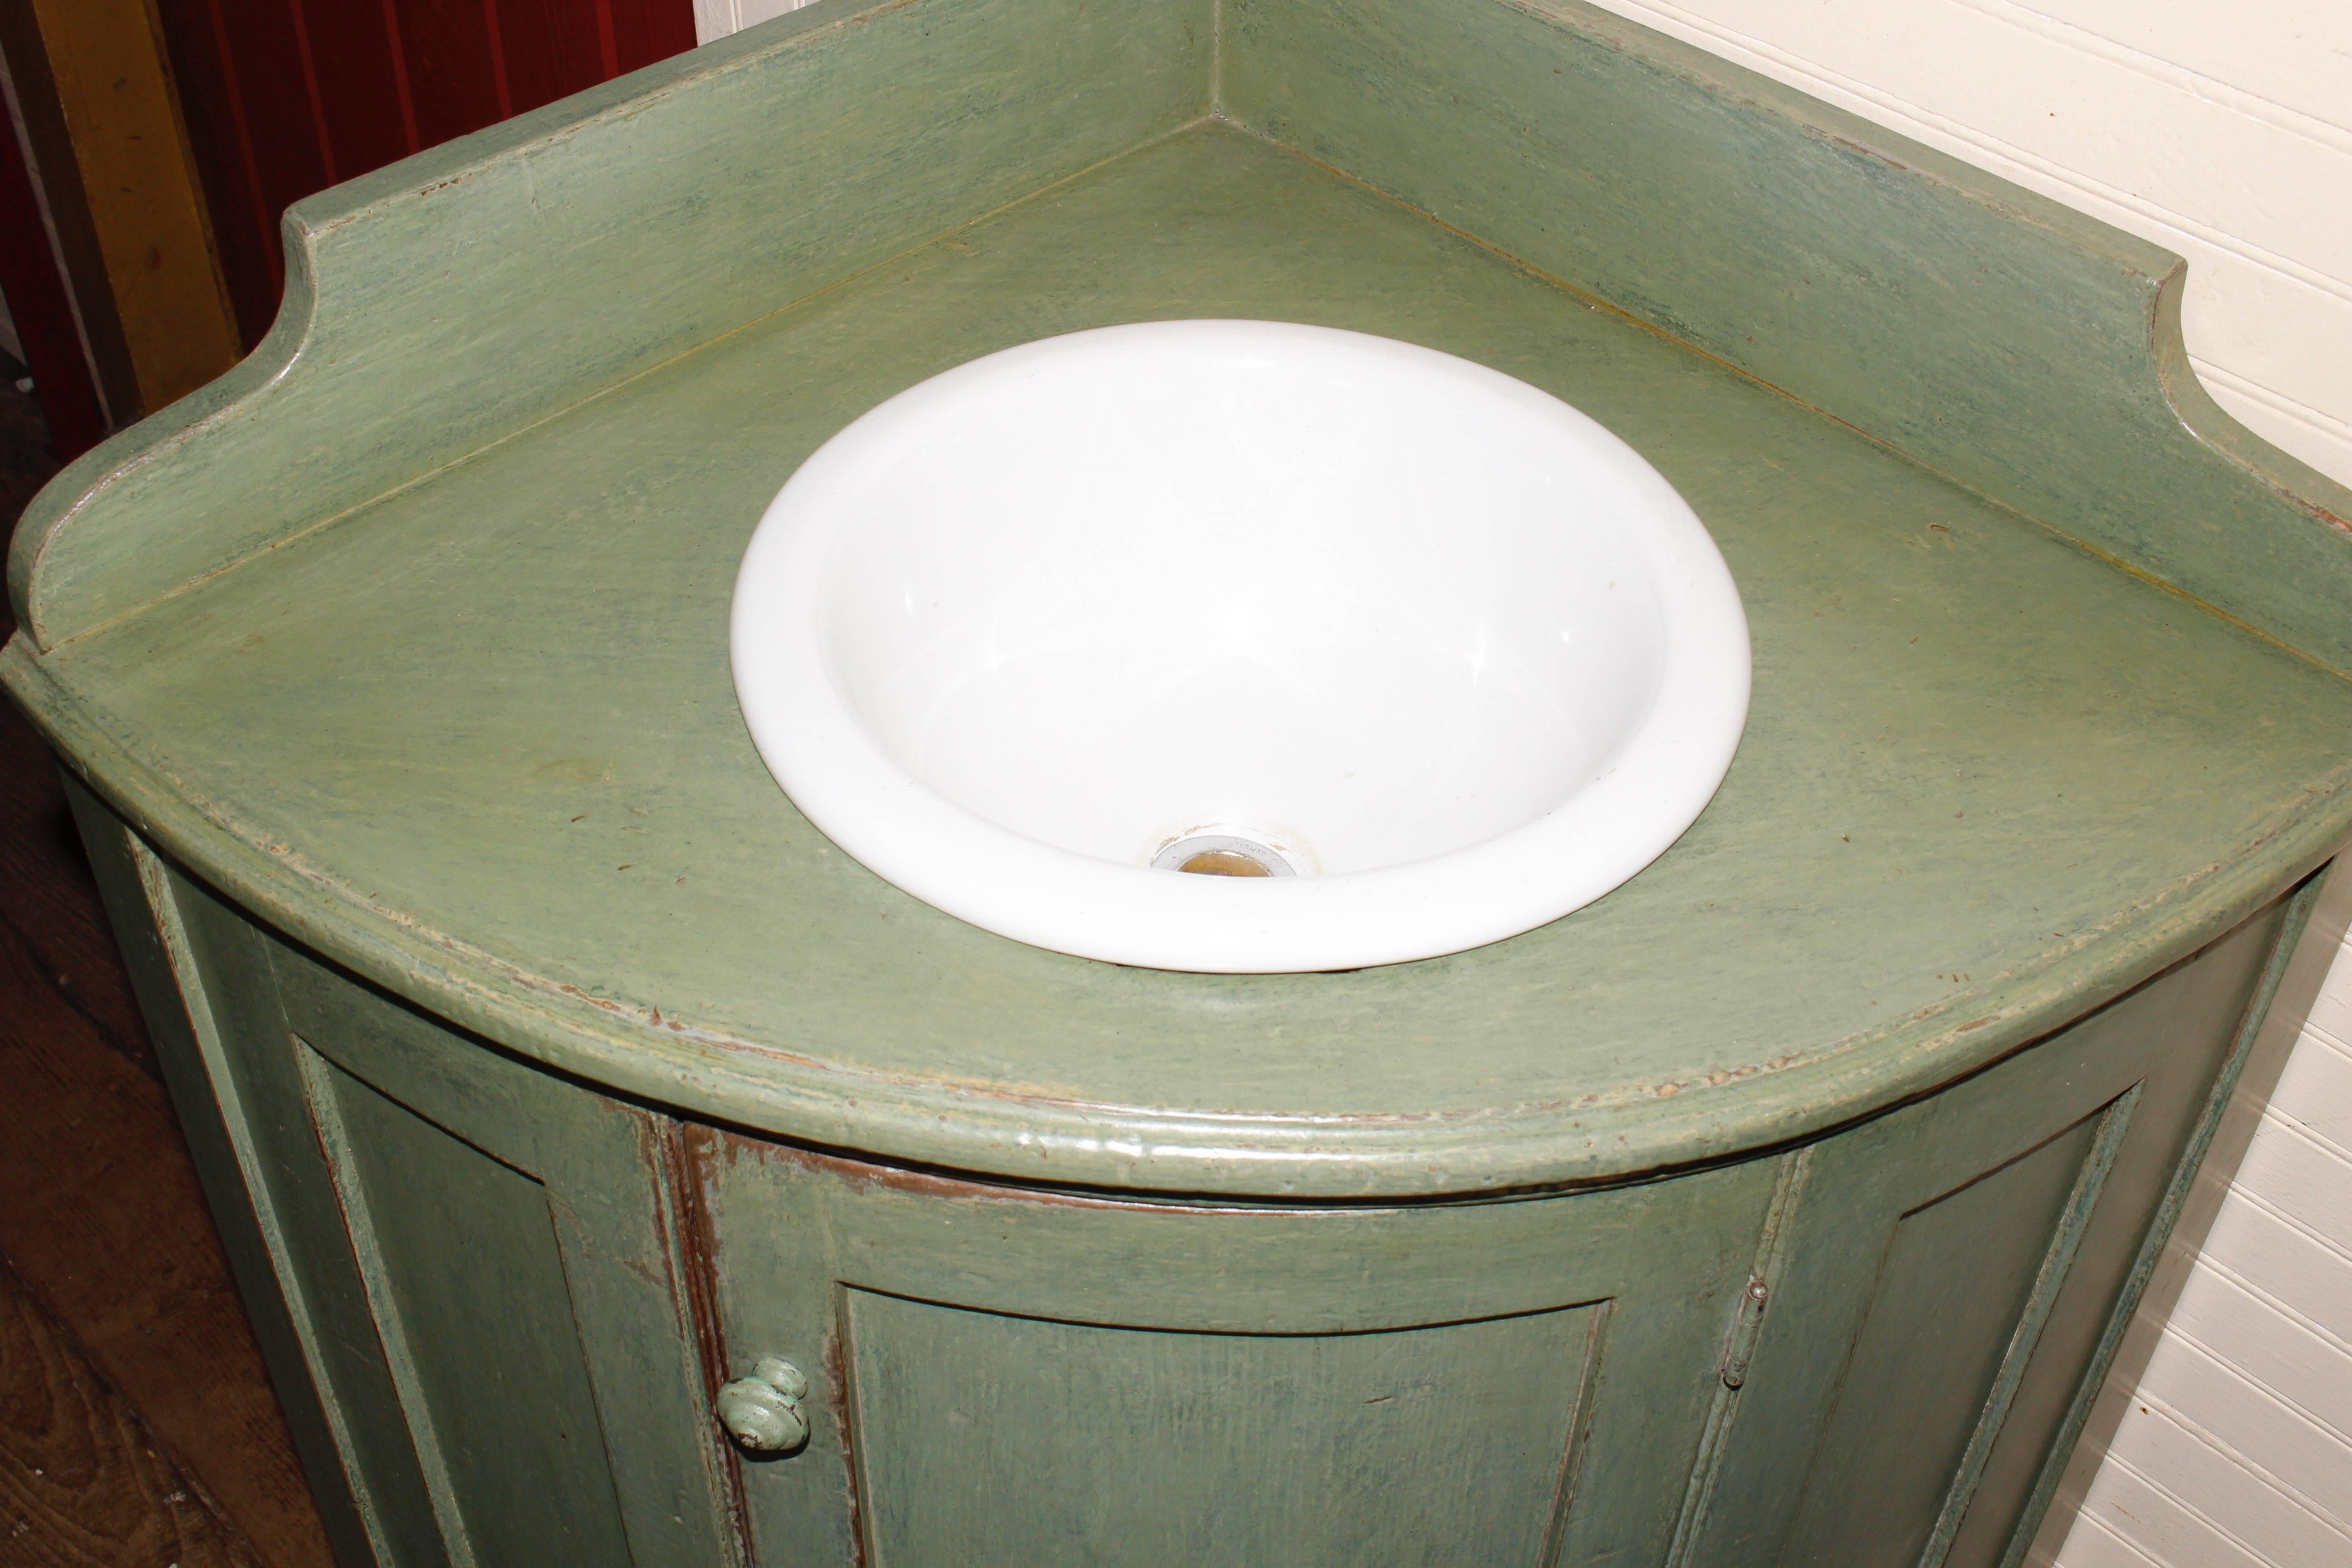 A corner vanity with a bowed front. Sink it not original to this piece.